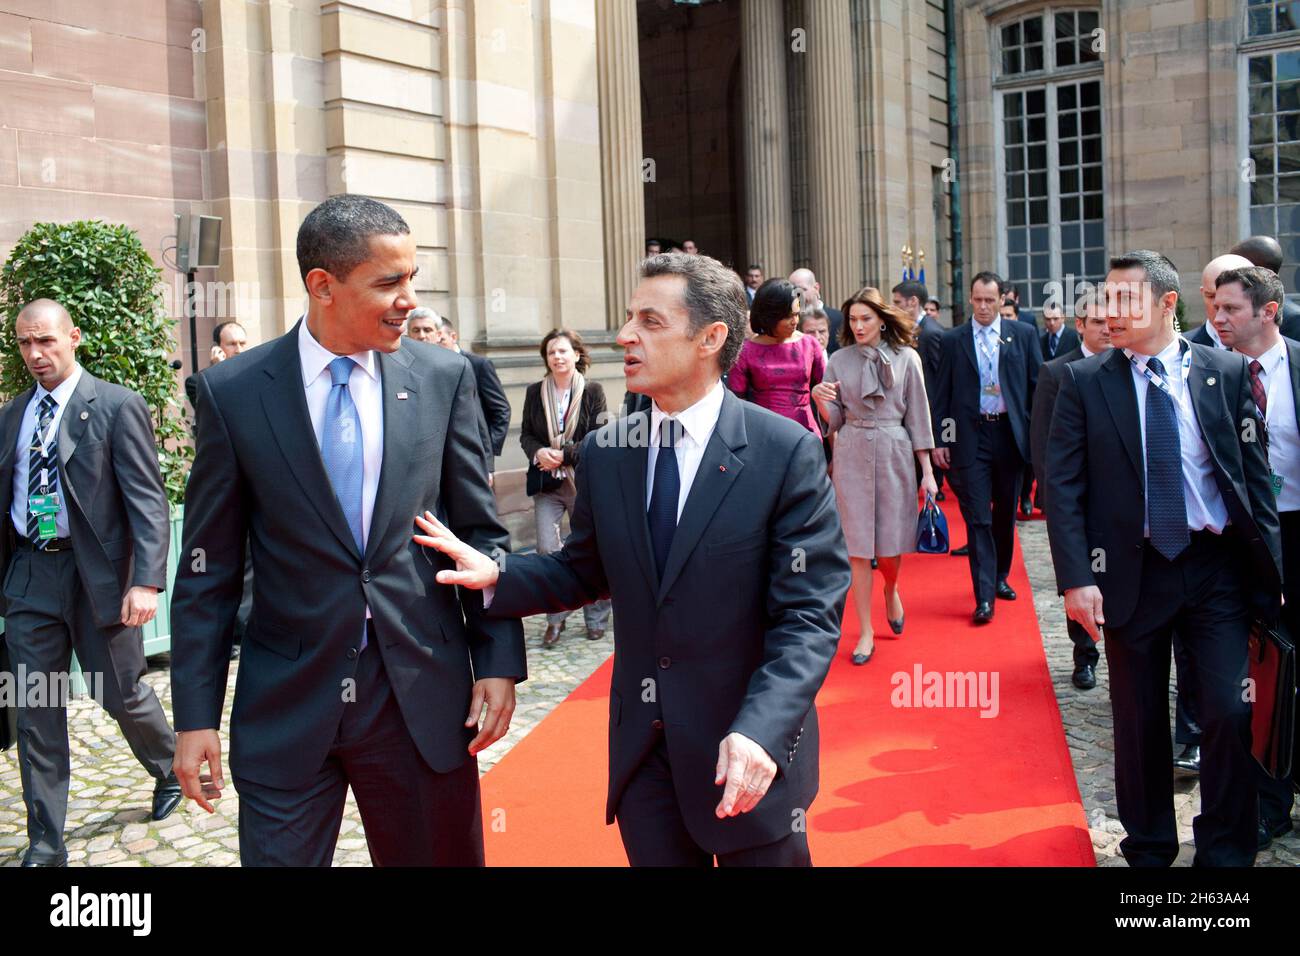 President Barack Obama walks with French President Nicolas Sarkozy from the Palais Rohan (Palace Rohan) April 3, 2009, following their meeting in Strausbourg, France Stock Photo